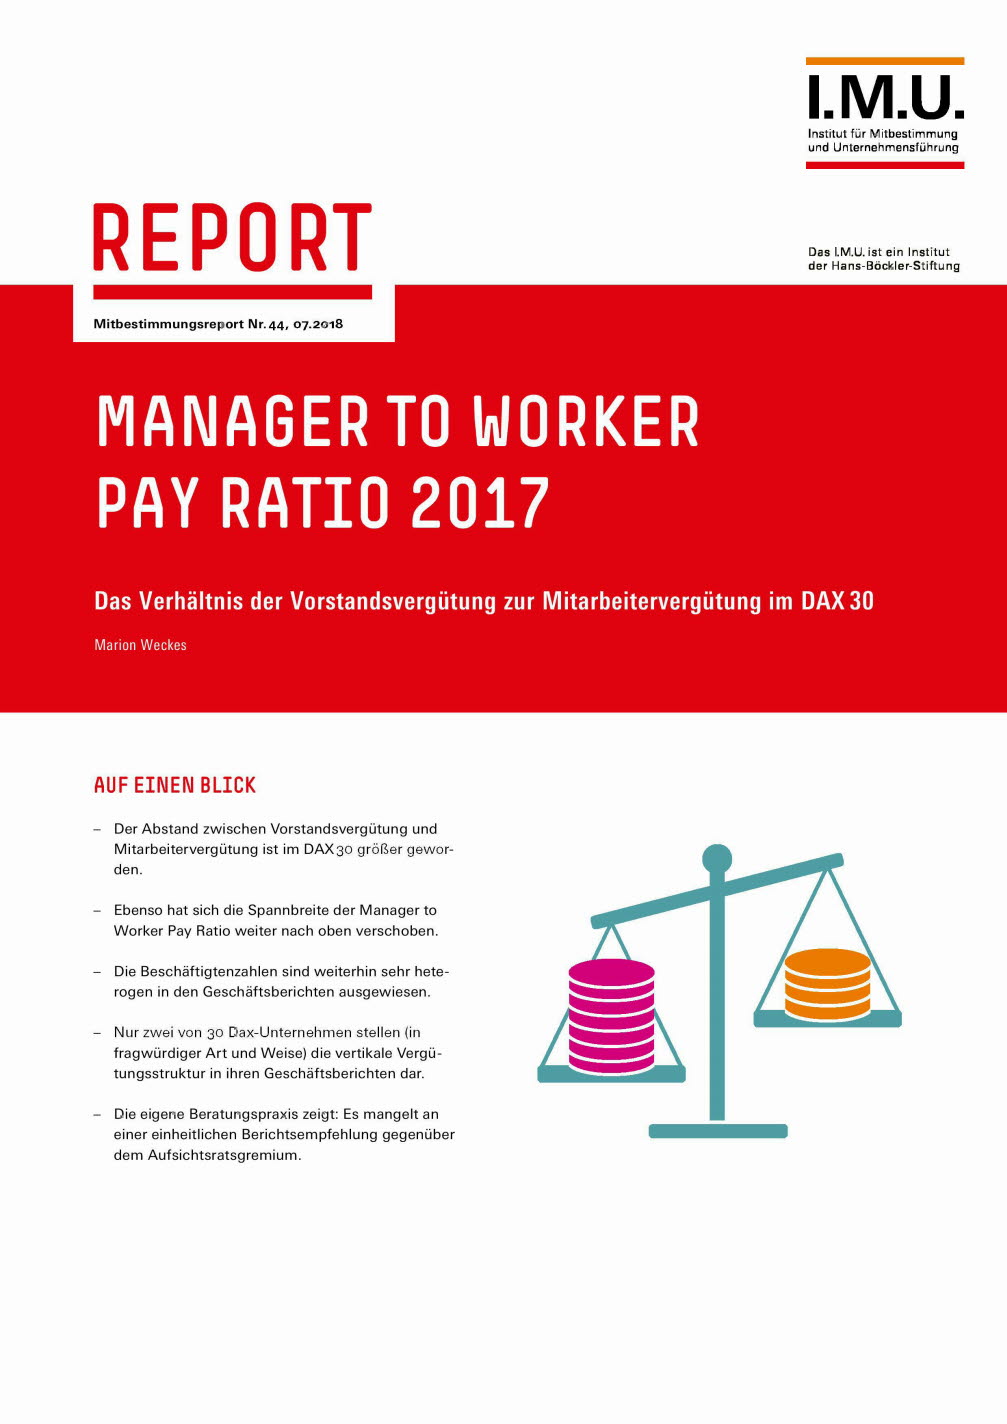 Manager to worker pay ratio 2017